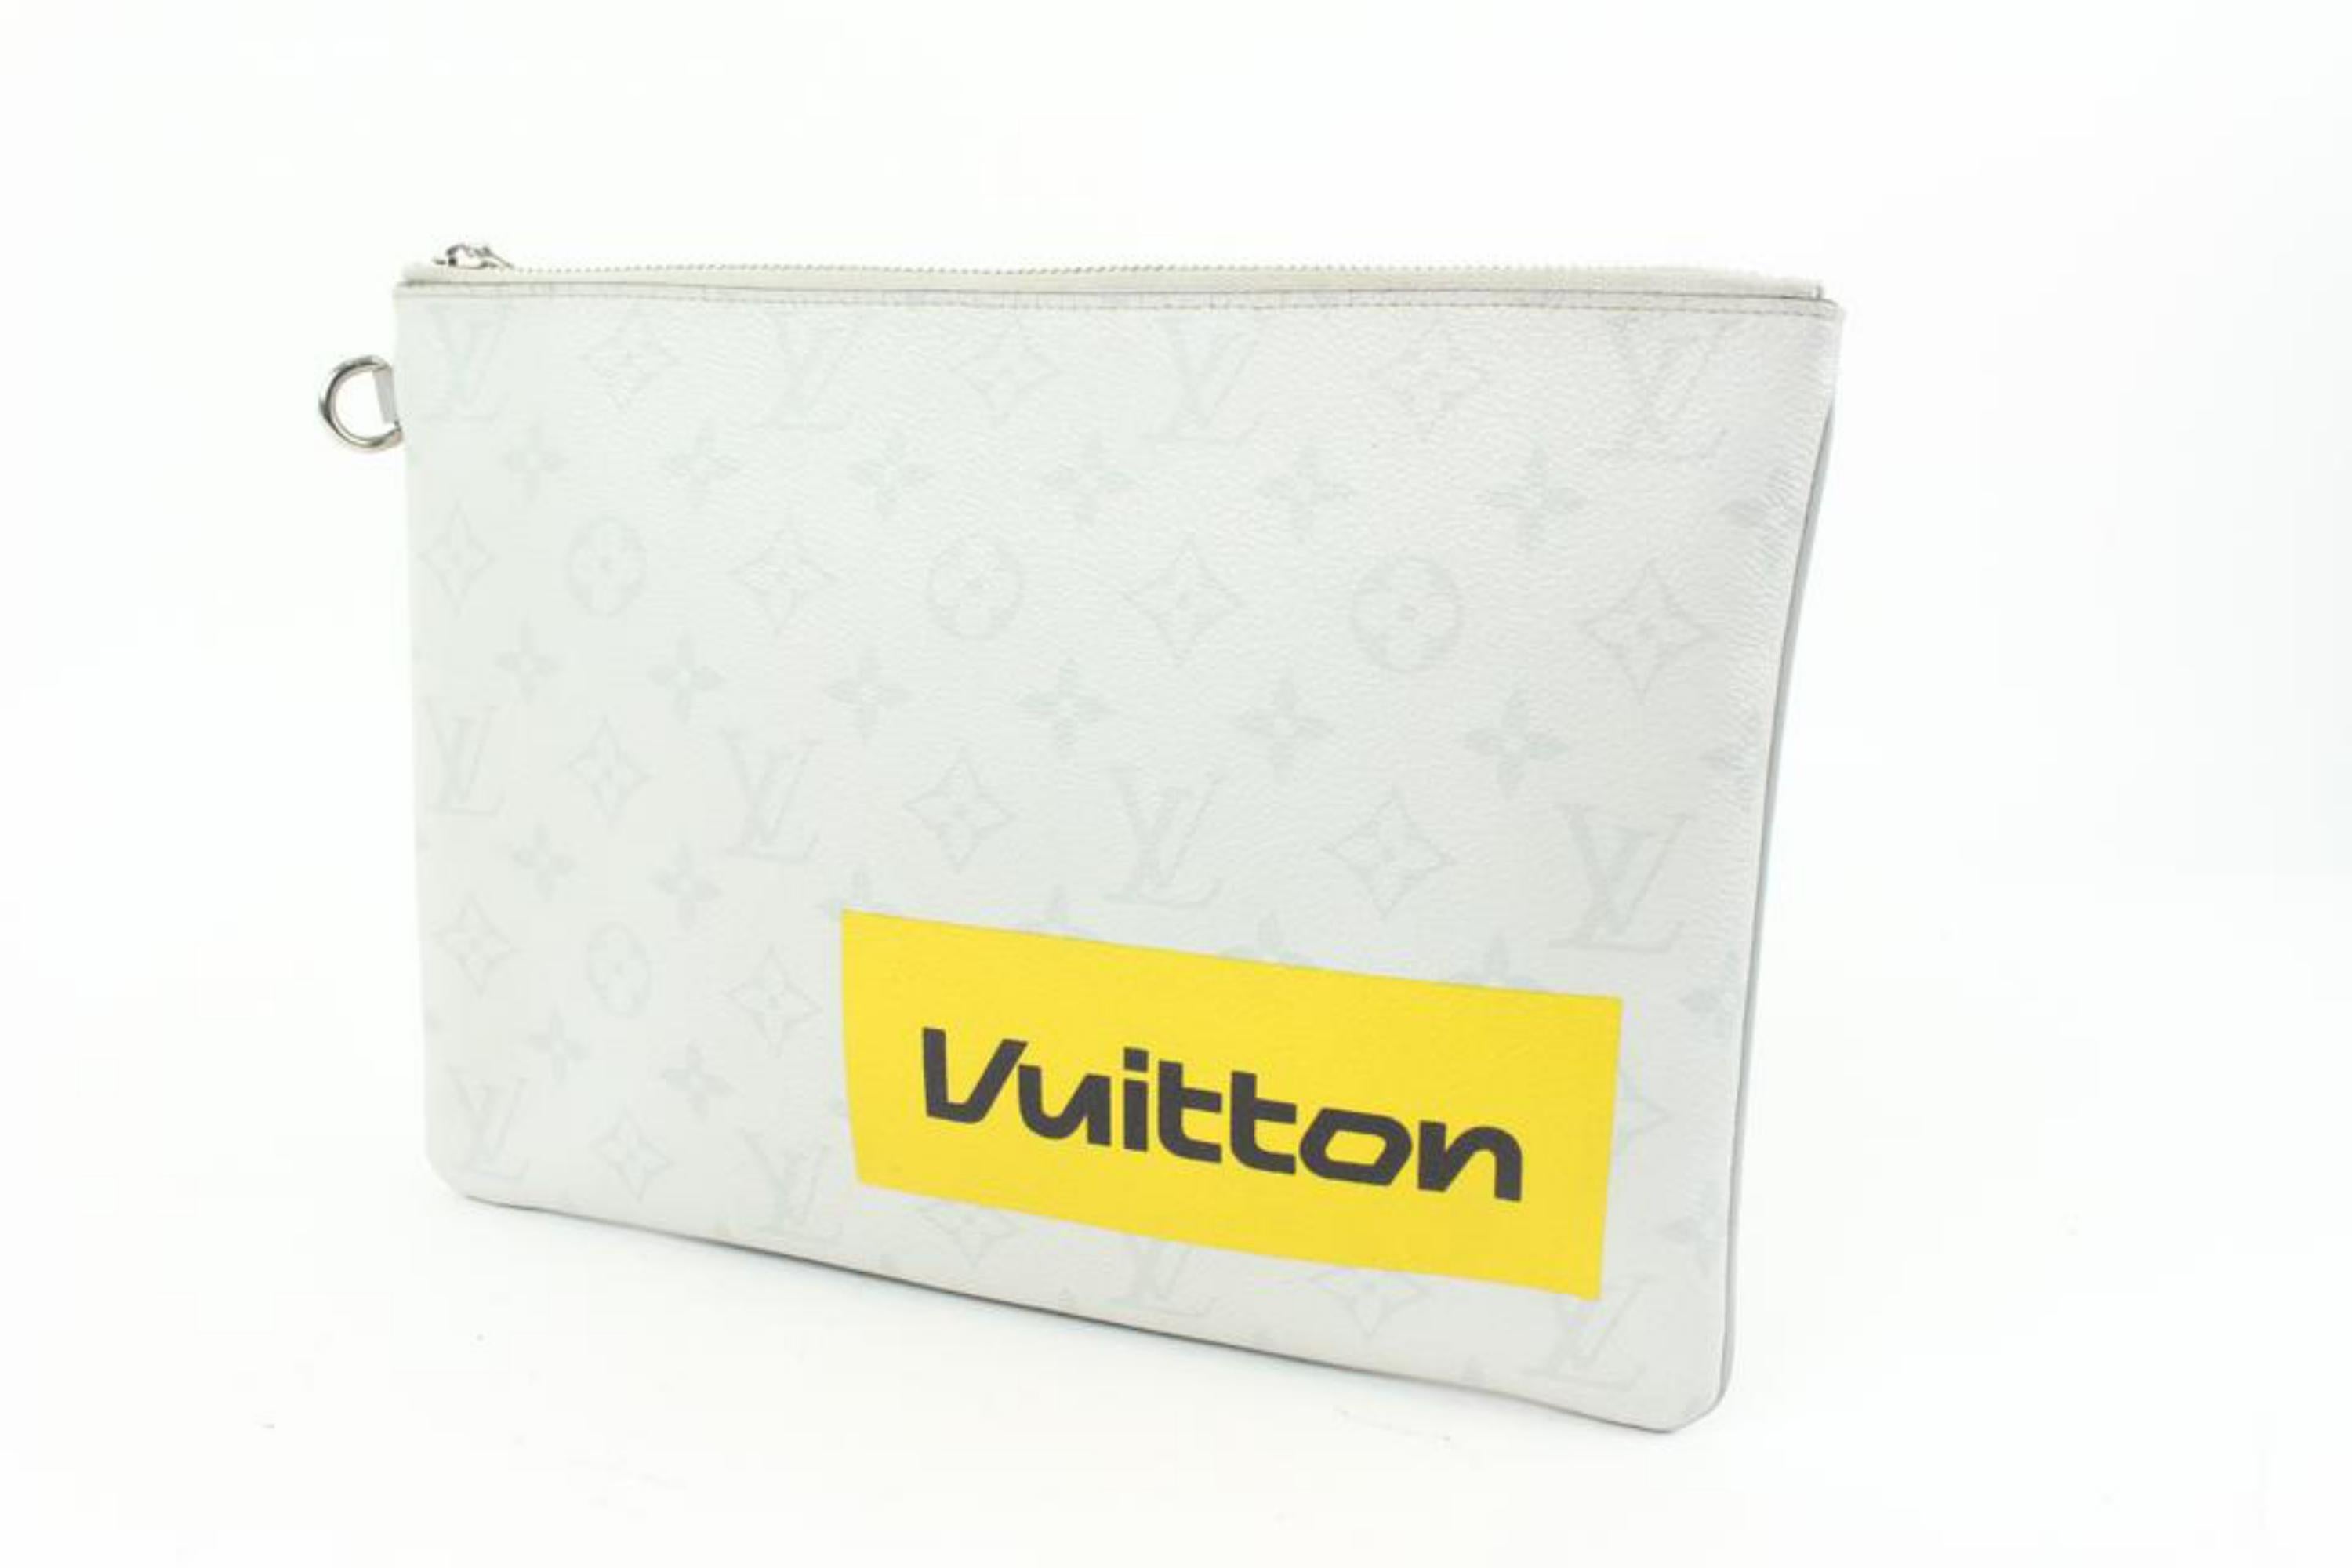 Louis Vuitton Virgil Abloh Arctic Monogram Zipped Pouch  GM Story 53lz414s
Date Code/Serial Number: RA2119
Made In: France
Measurements: Length:  11